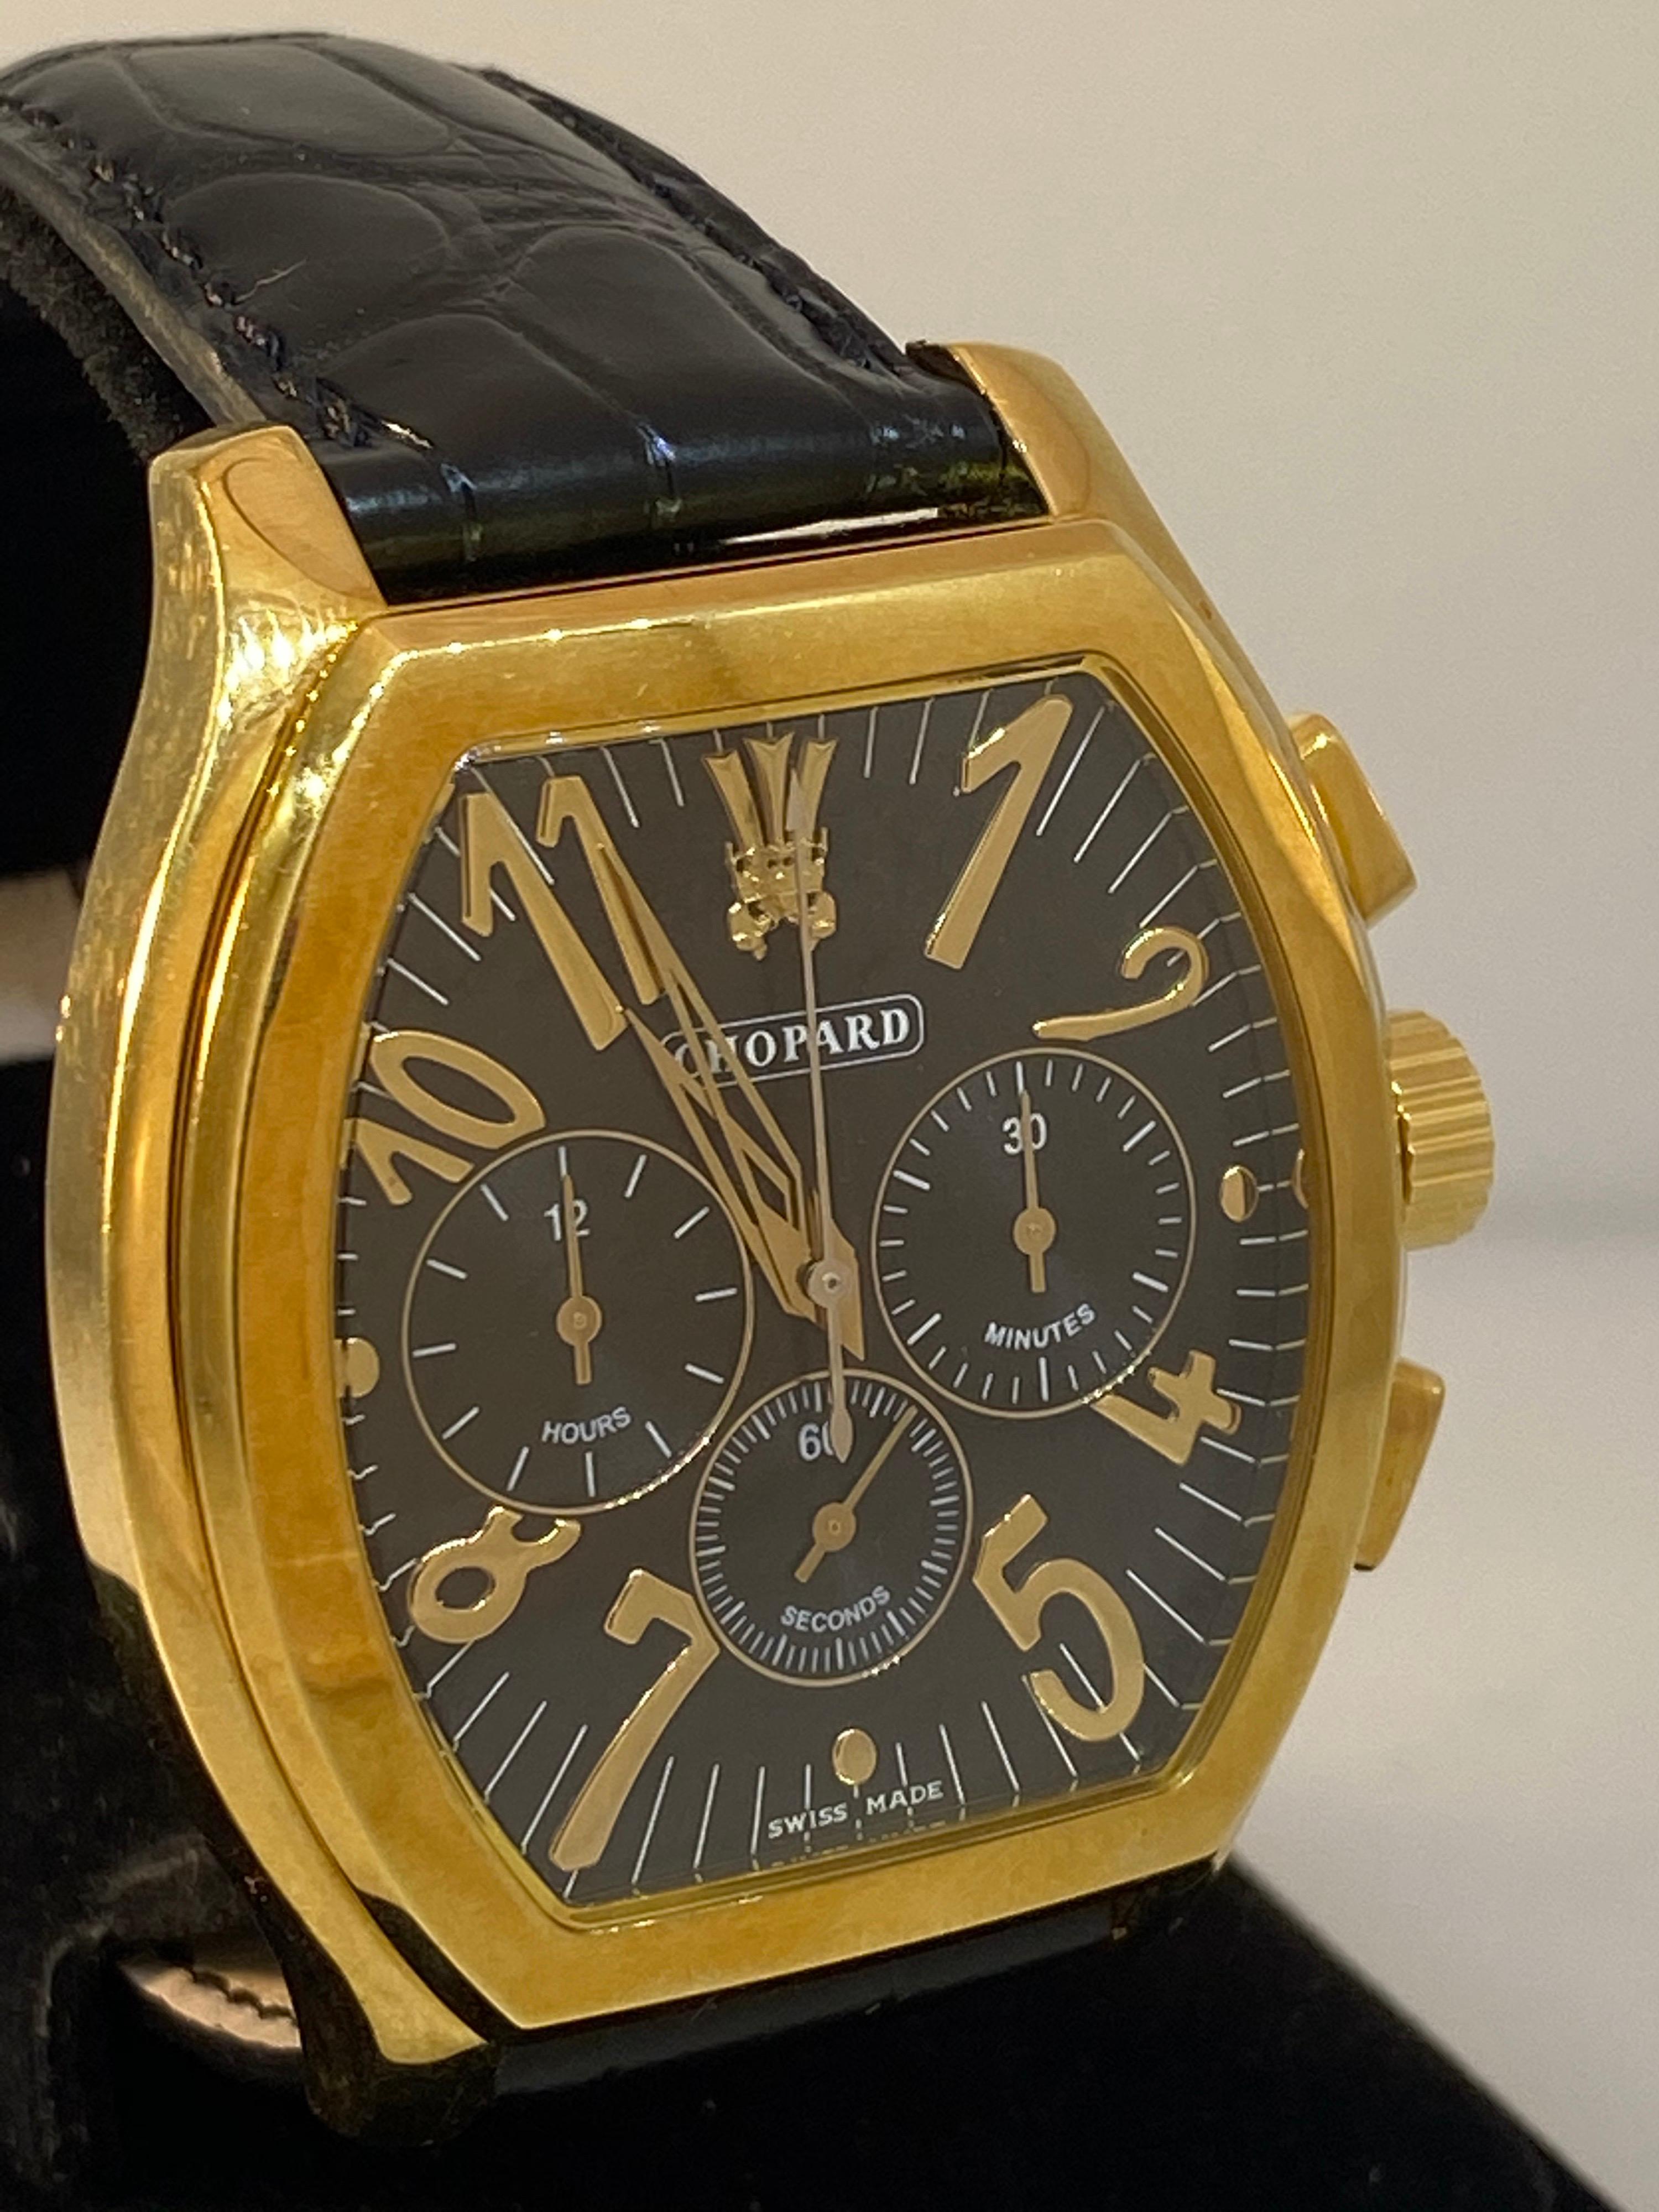 Chopard L.U.C. Prince Foundation Watch

Model Number: 16/2278

Limited Edition 200 Pieces

100% Authentic

New (Old Stock)

Comes with original Chopard box and instruction manual

18 Karat Yellow Gold

Sapphire Crystal

Black Dial & Subdials

Arabic